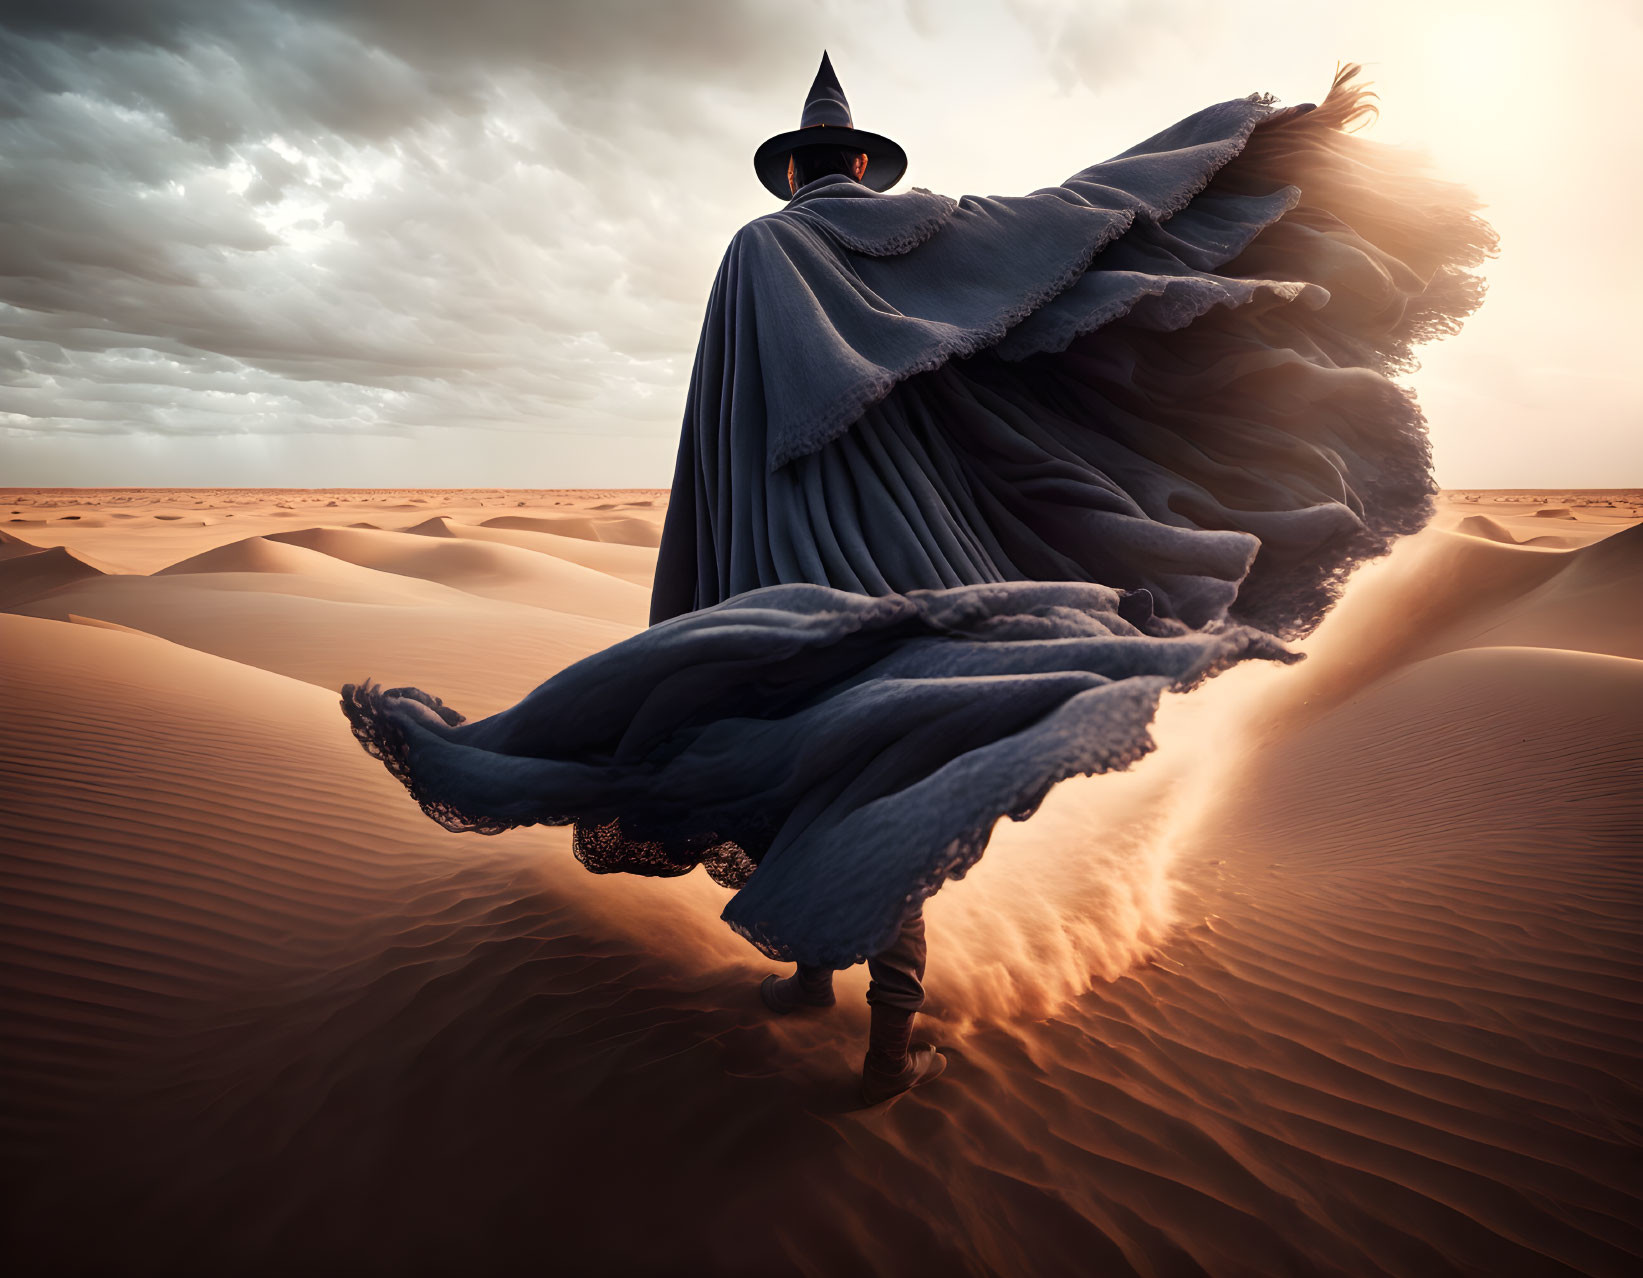 Cloaked figure with pointed hat on sand dune in dramatic desert scene